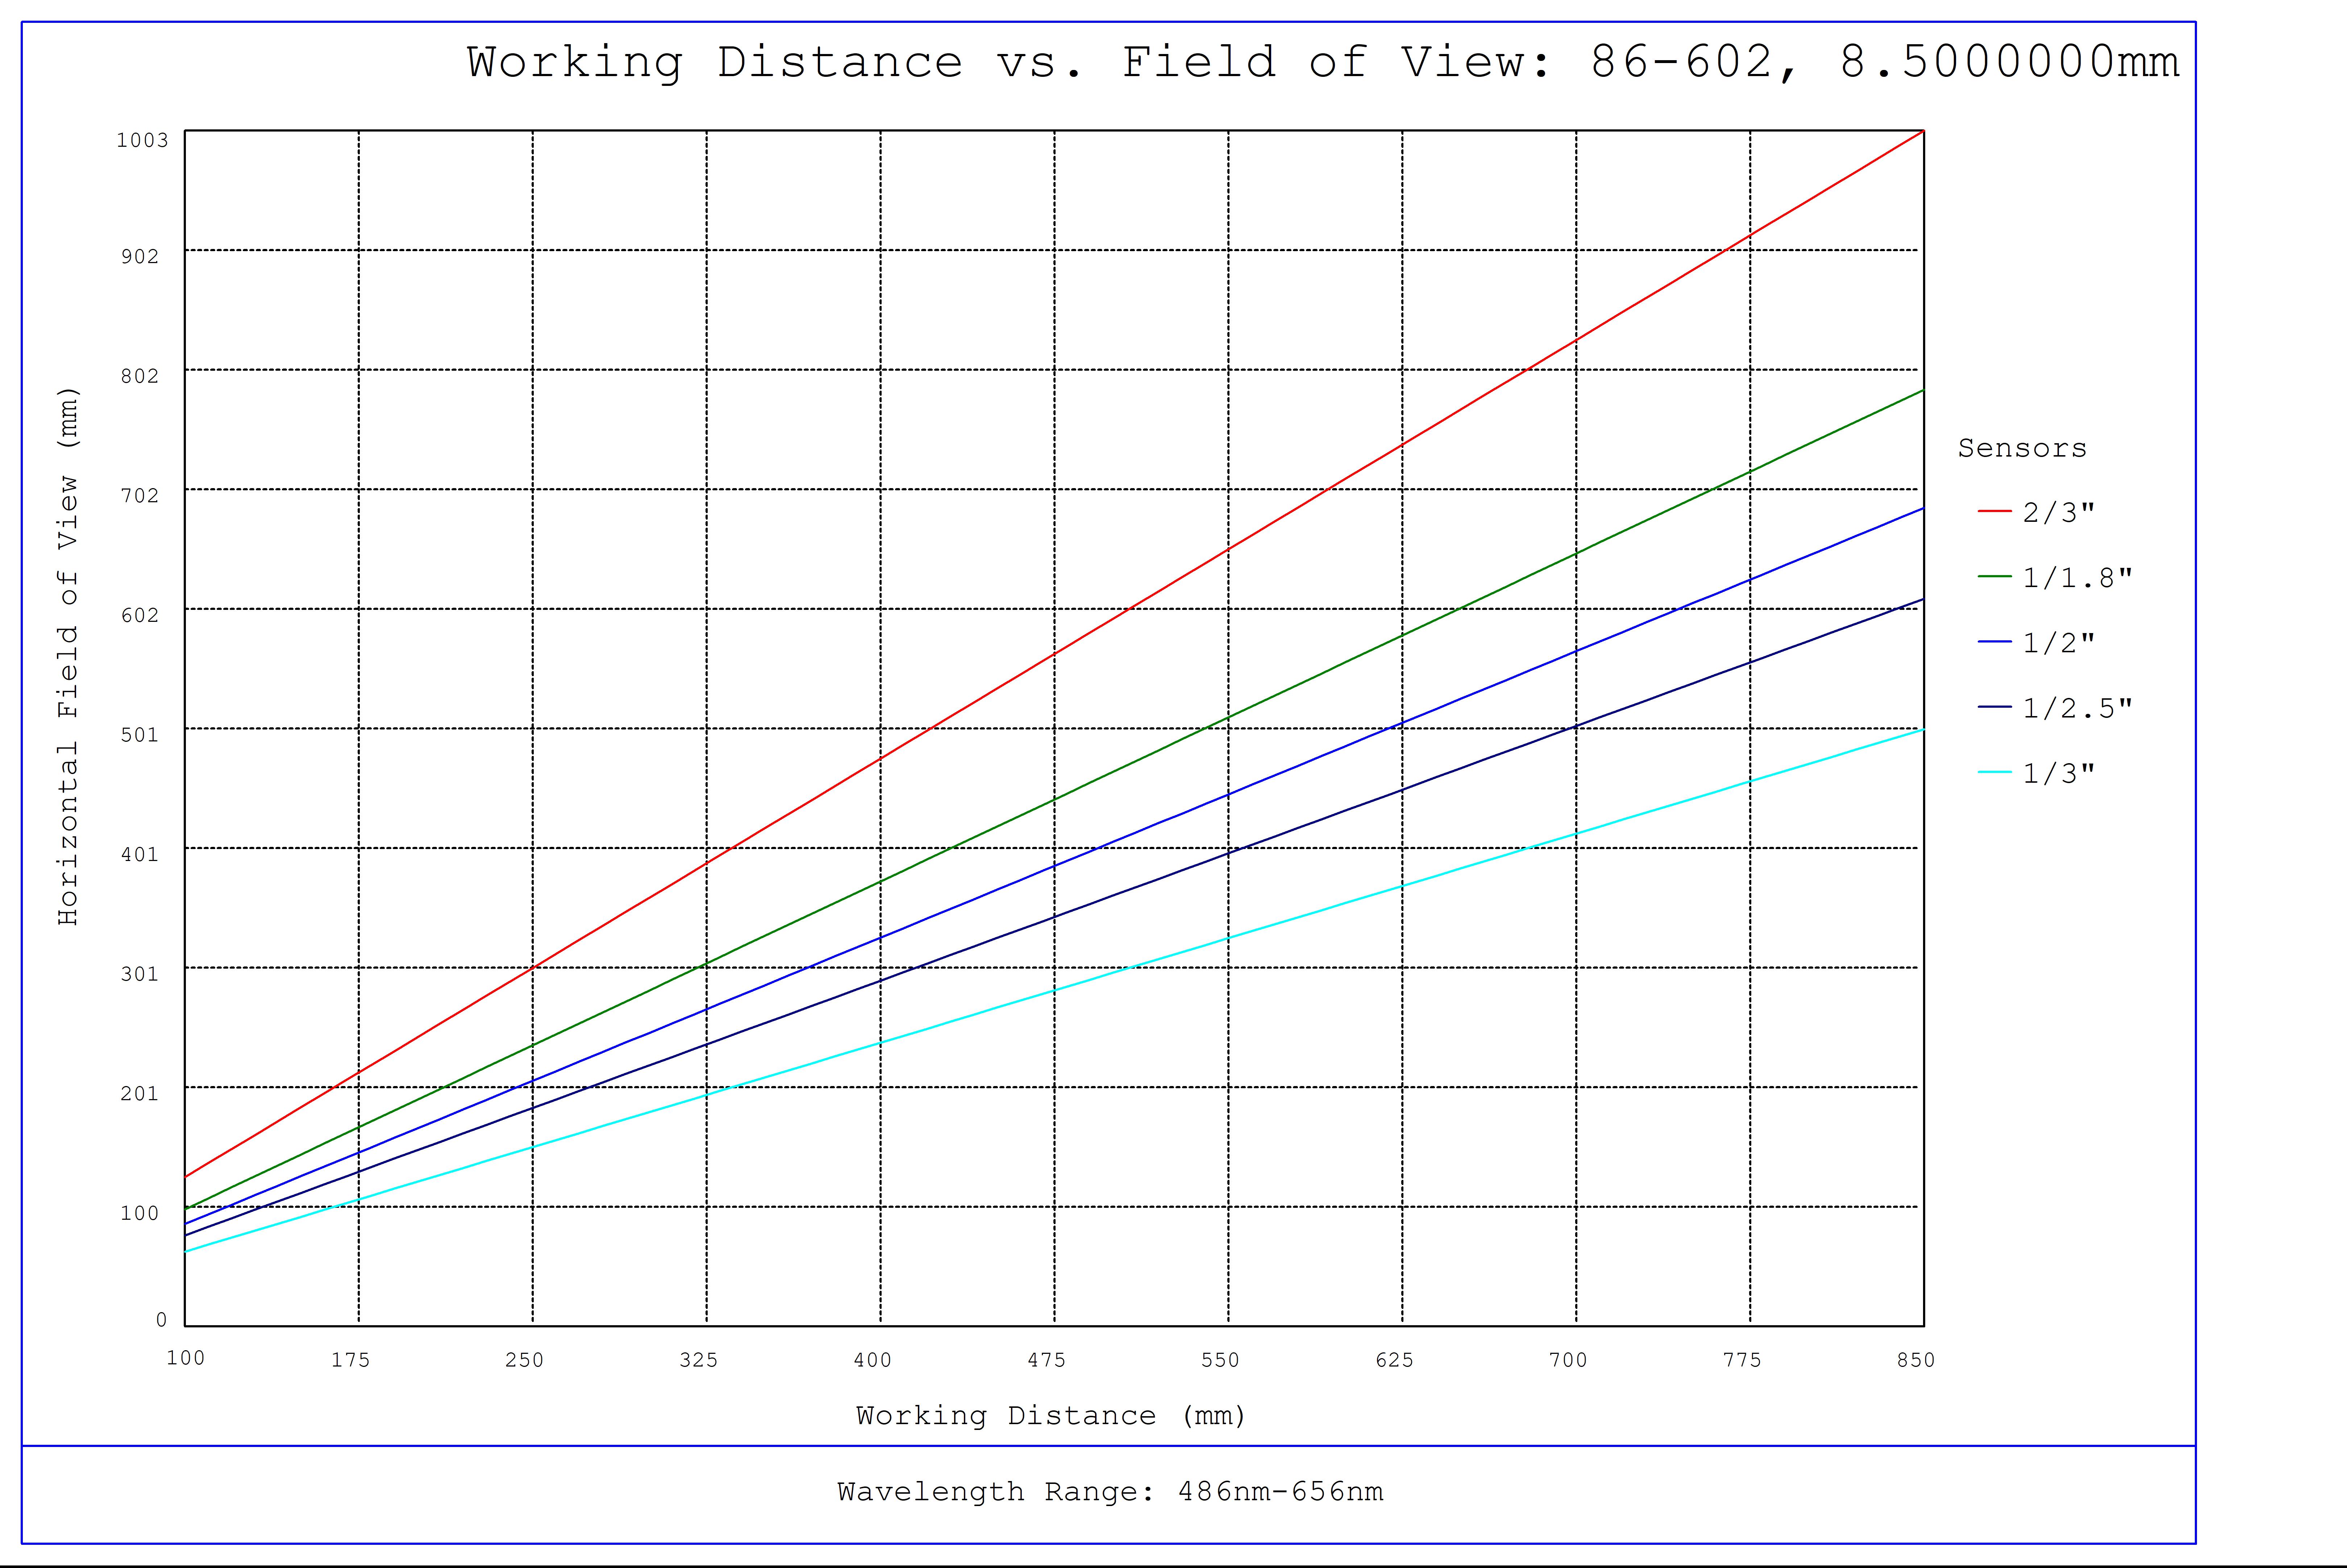 #86-602, 8.5mm, f/4 Ci Series Fixed Focal Length Lens, Working Distance versus Field of View Plot